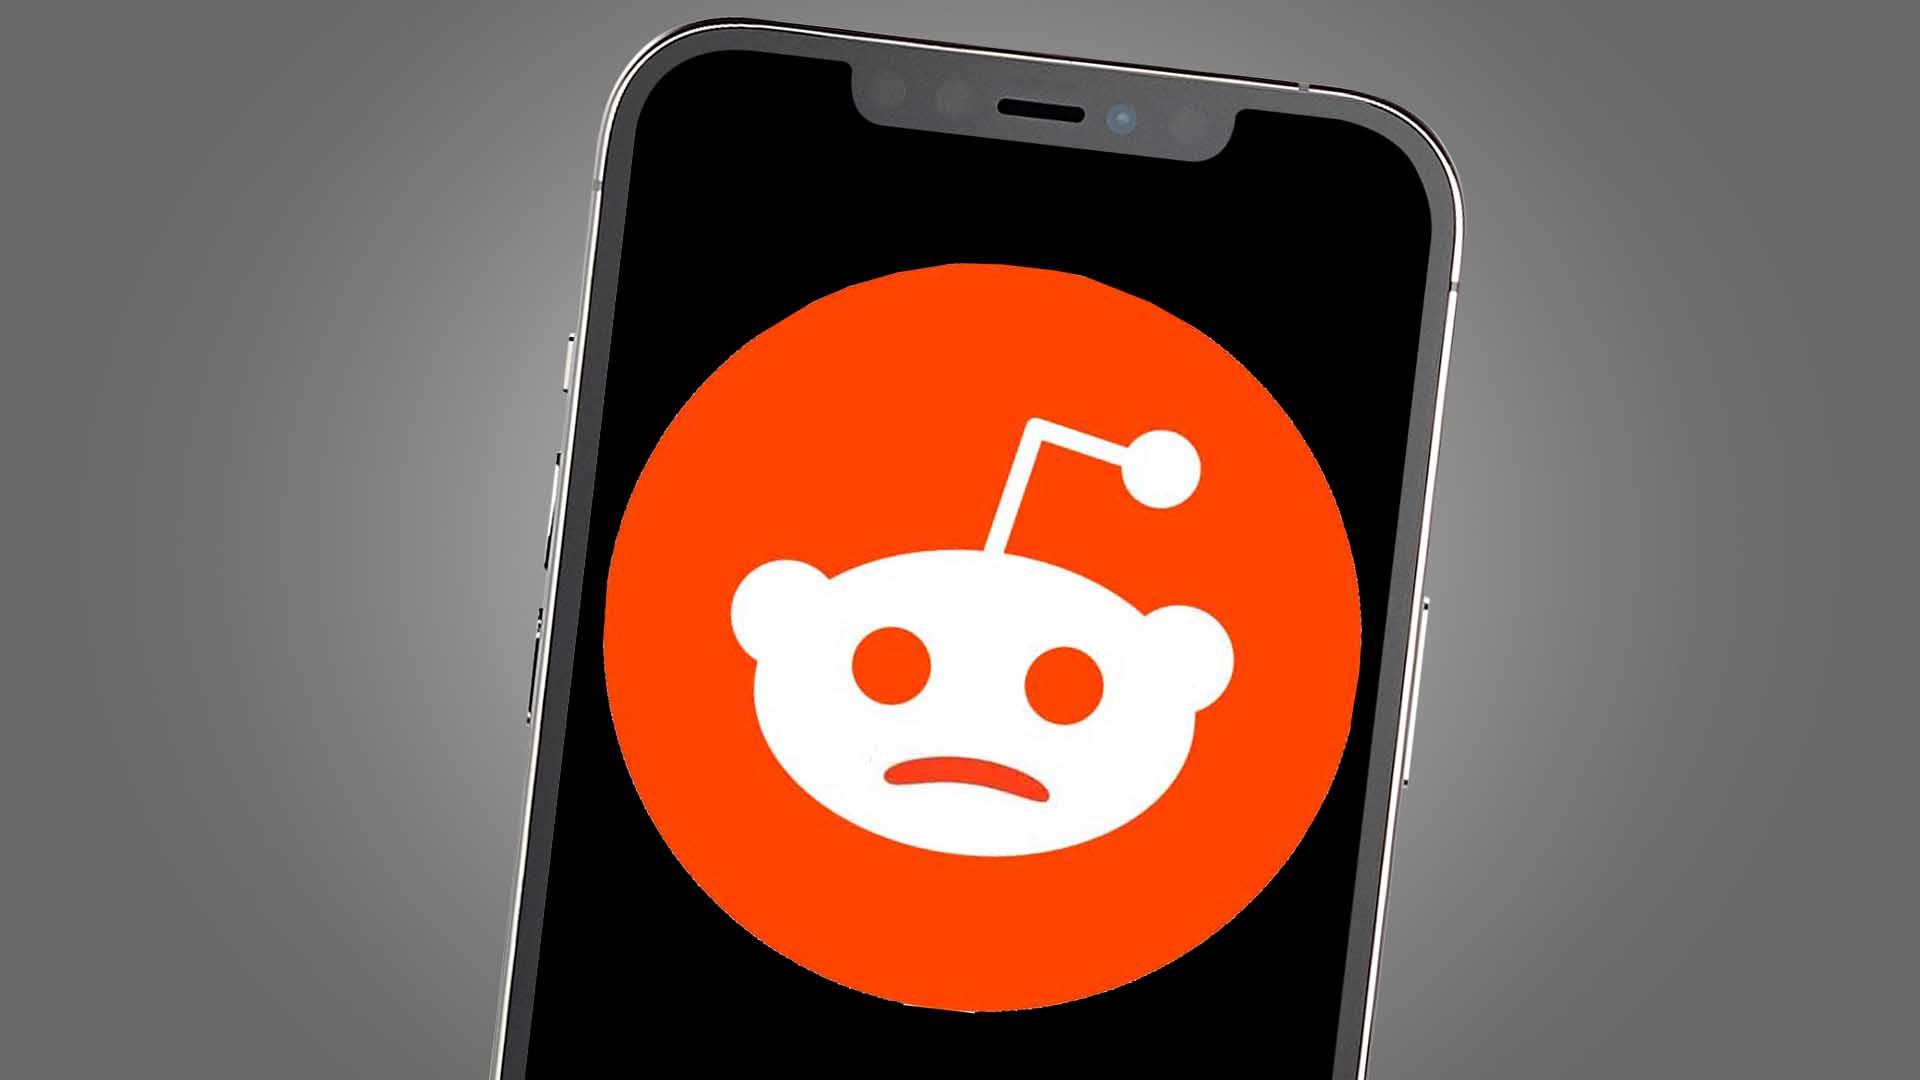 Fixed] Reddit App Not Loading Videos, GIFs, Posts on Android & iOS